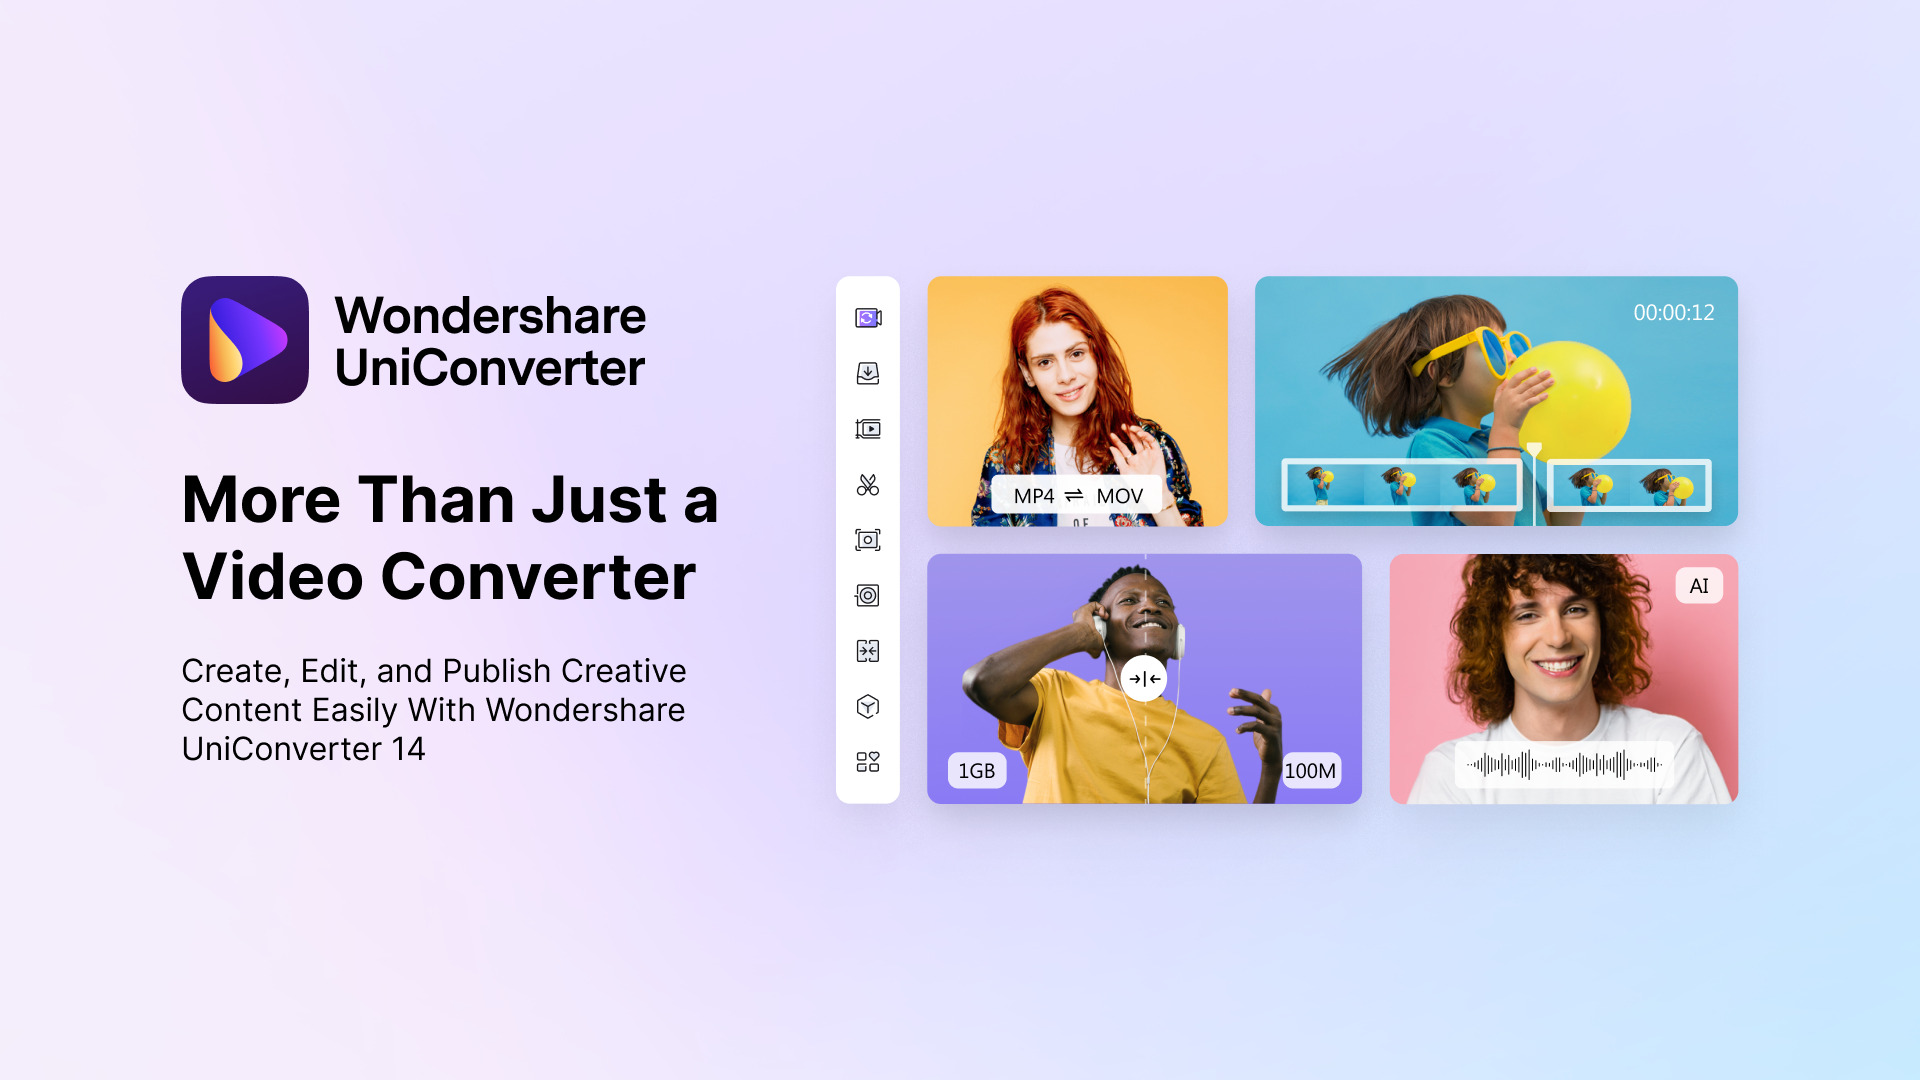 Here’s Why Wondershare Uniconverter 14 Is a One-in-All Multimedia Tool